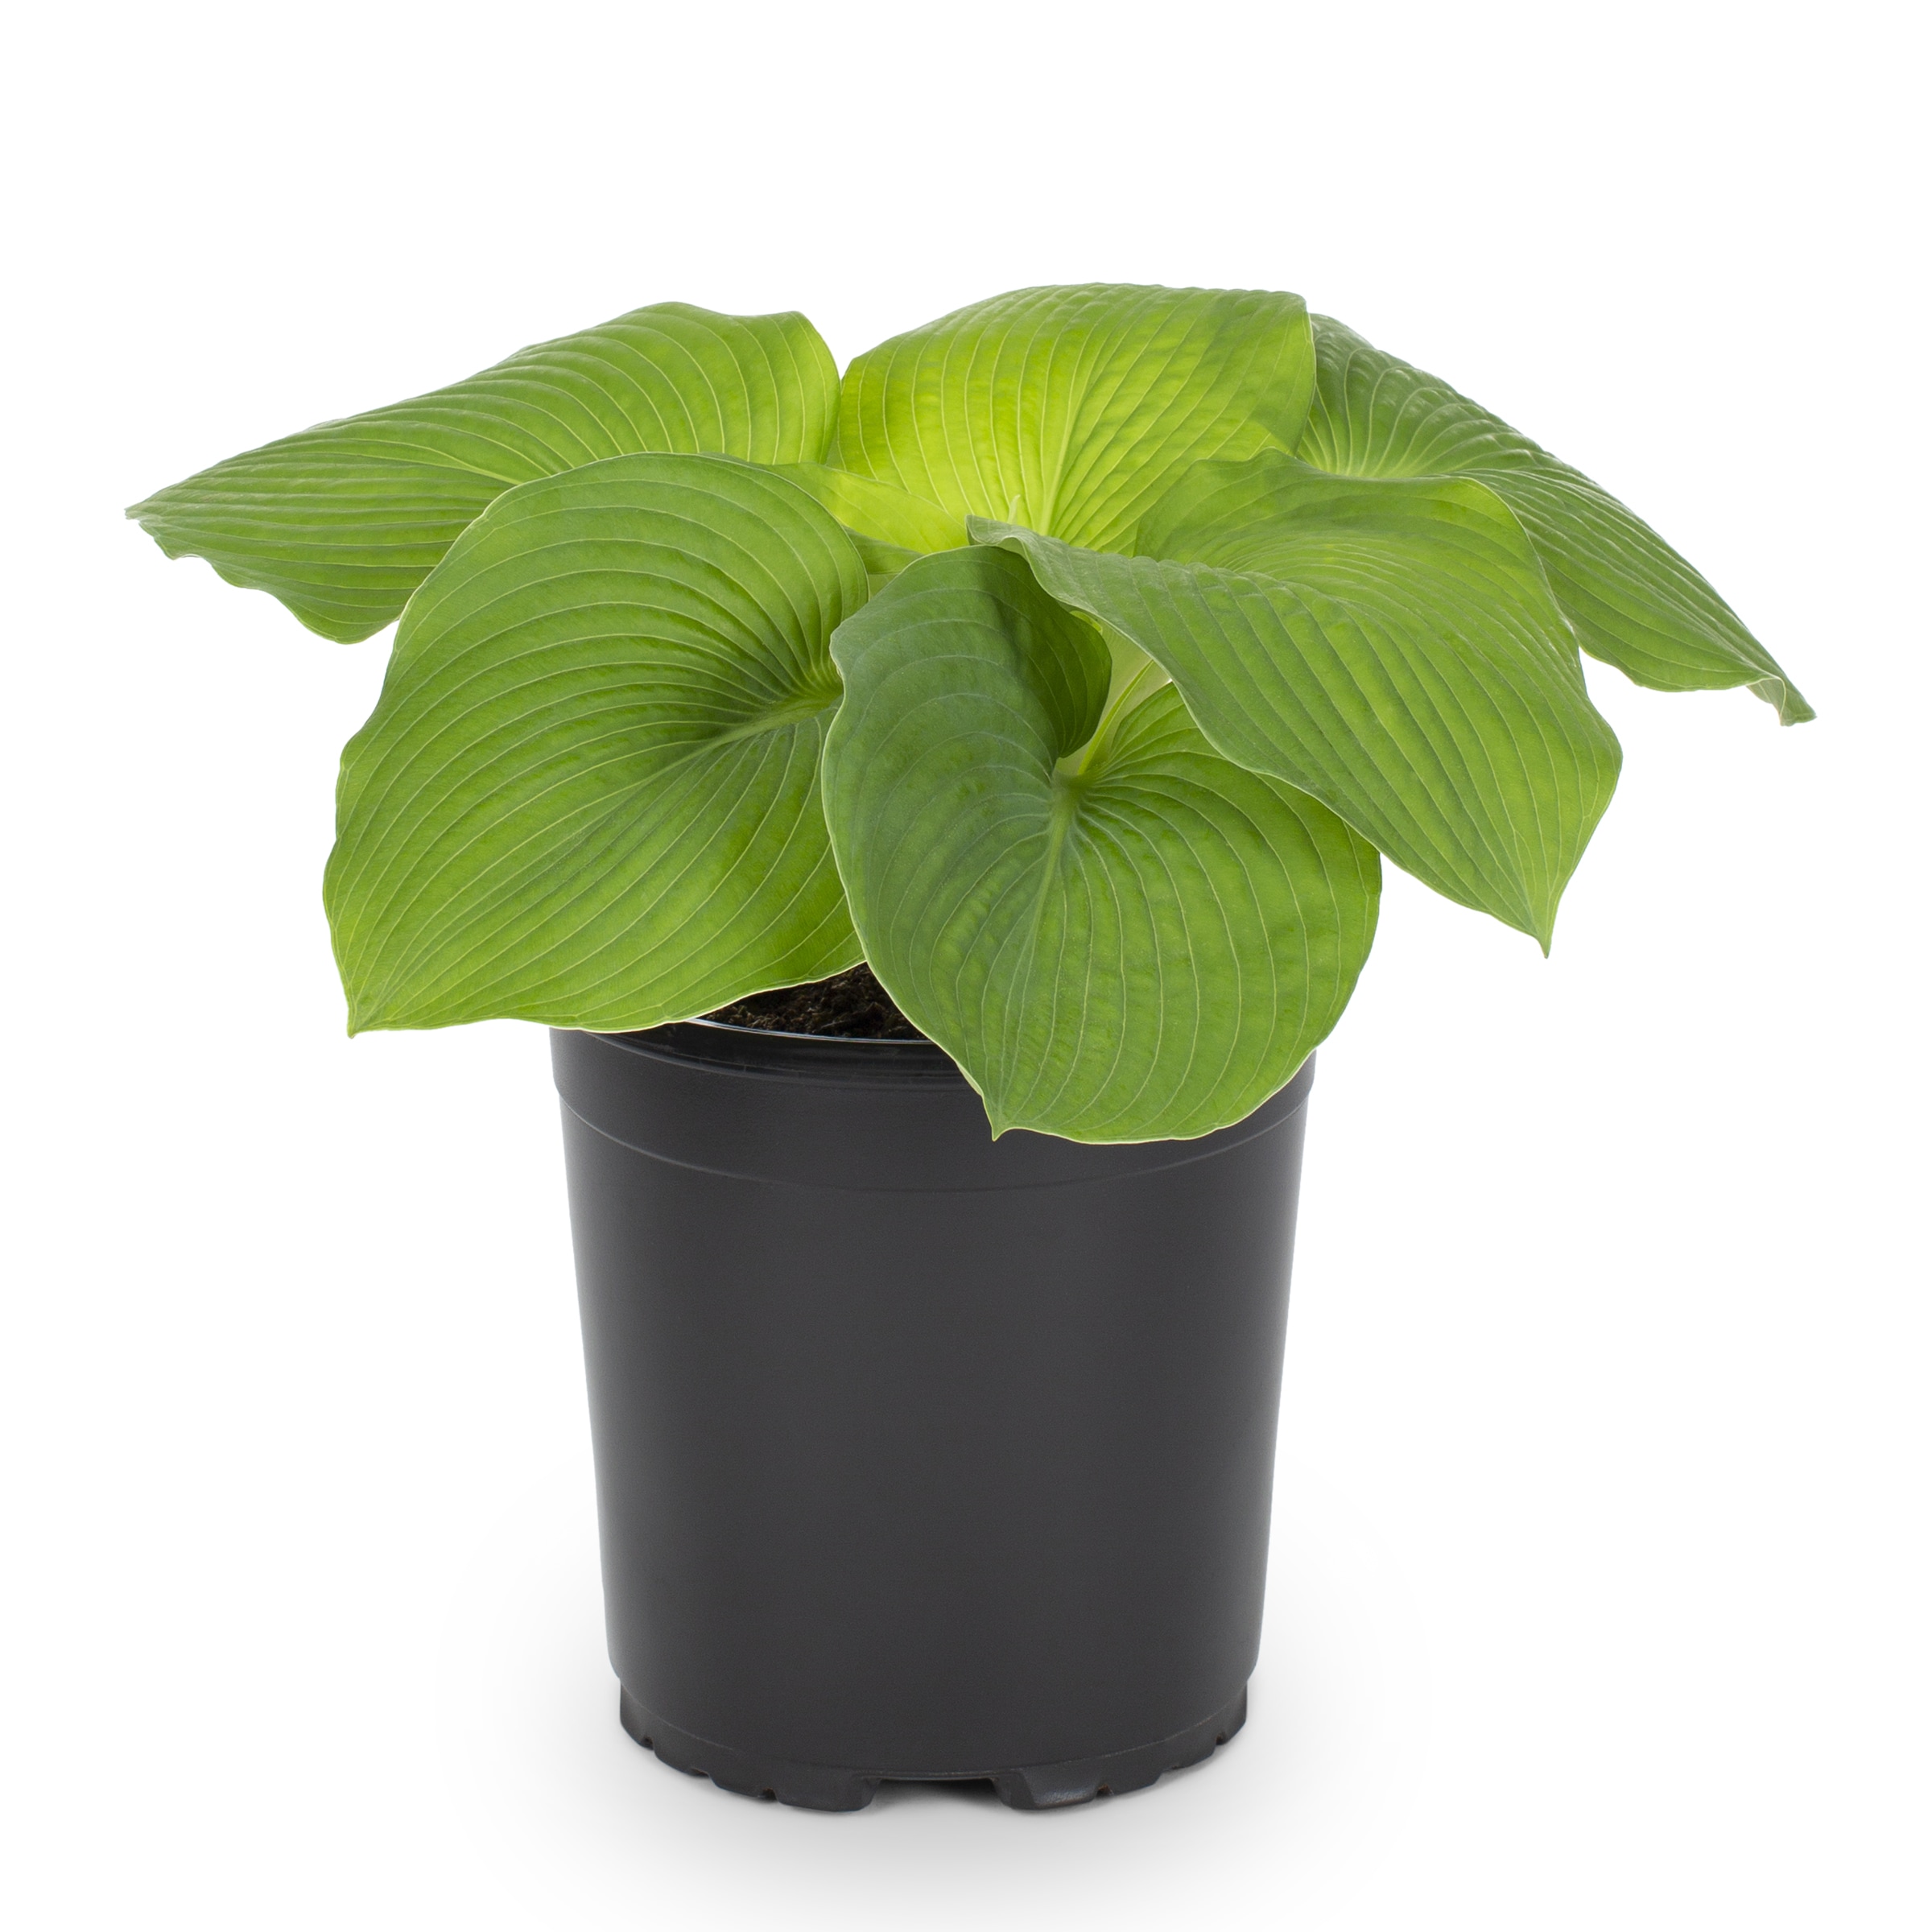 Lowe's Blue Plantain Lily Plant in 2.5-Quart Pot in the Perennials ...